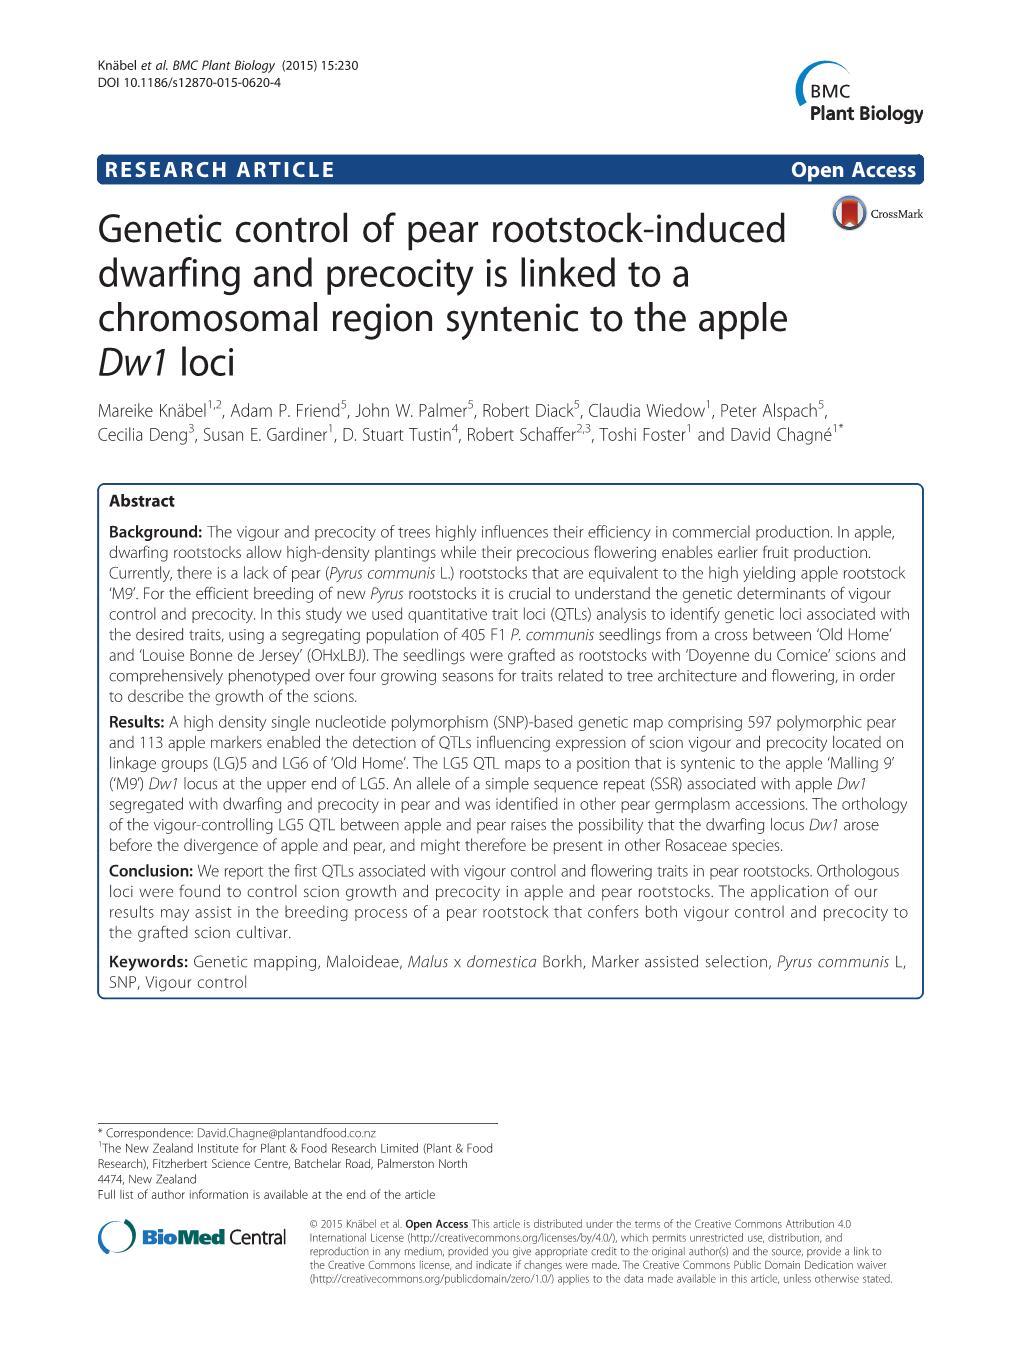 Genetic Control of Pear Rootstock-Induced Dwarfing and Precocity Is Linked to a Chromosomal Region Syntenic to the Apple Dw1 Loci Mareike Knäbel1,2, Adam P